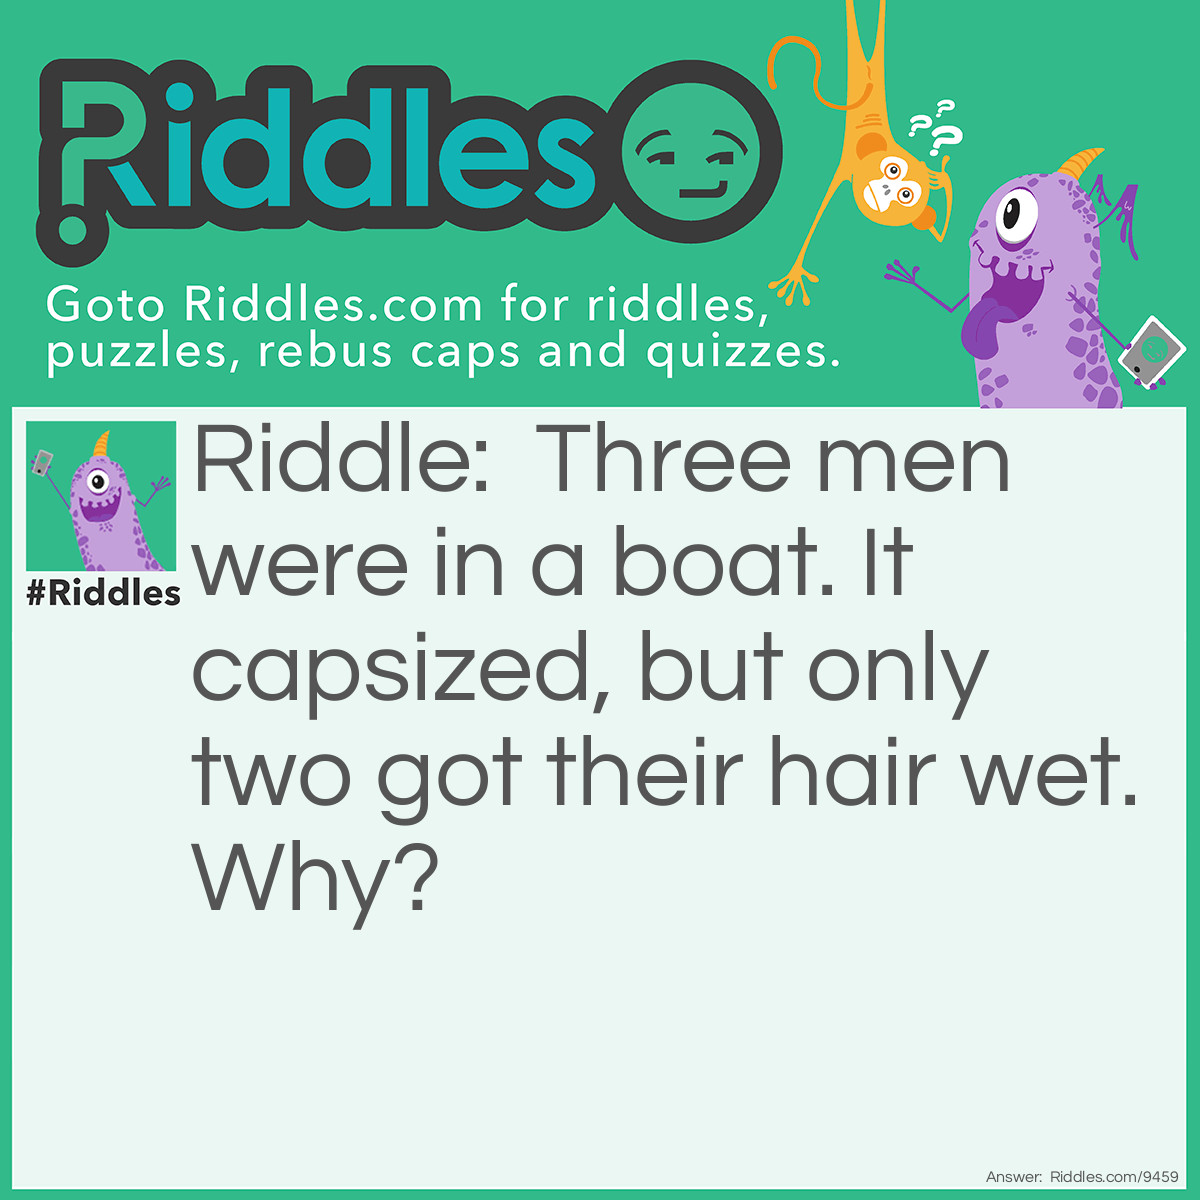 Riddle: Three men were in a boat. It capsized, but only two got their hair wet. Why? Answer: One was bald.